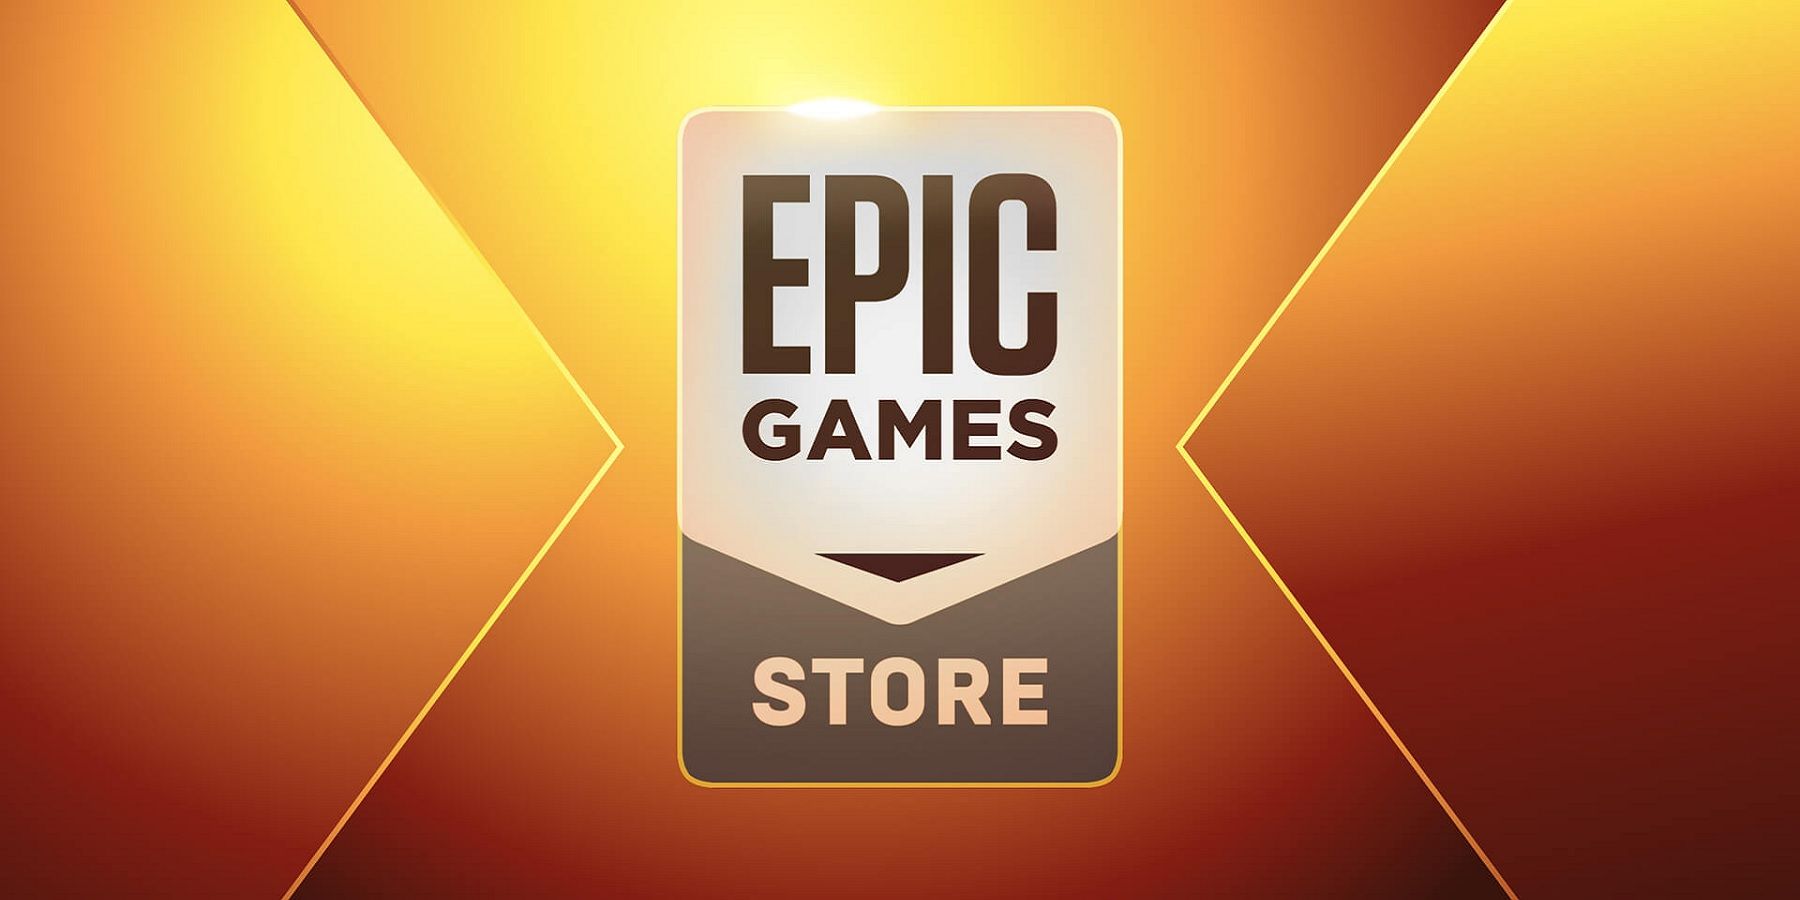 Golden Light | Download and Buy Today - Epic Games Store